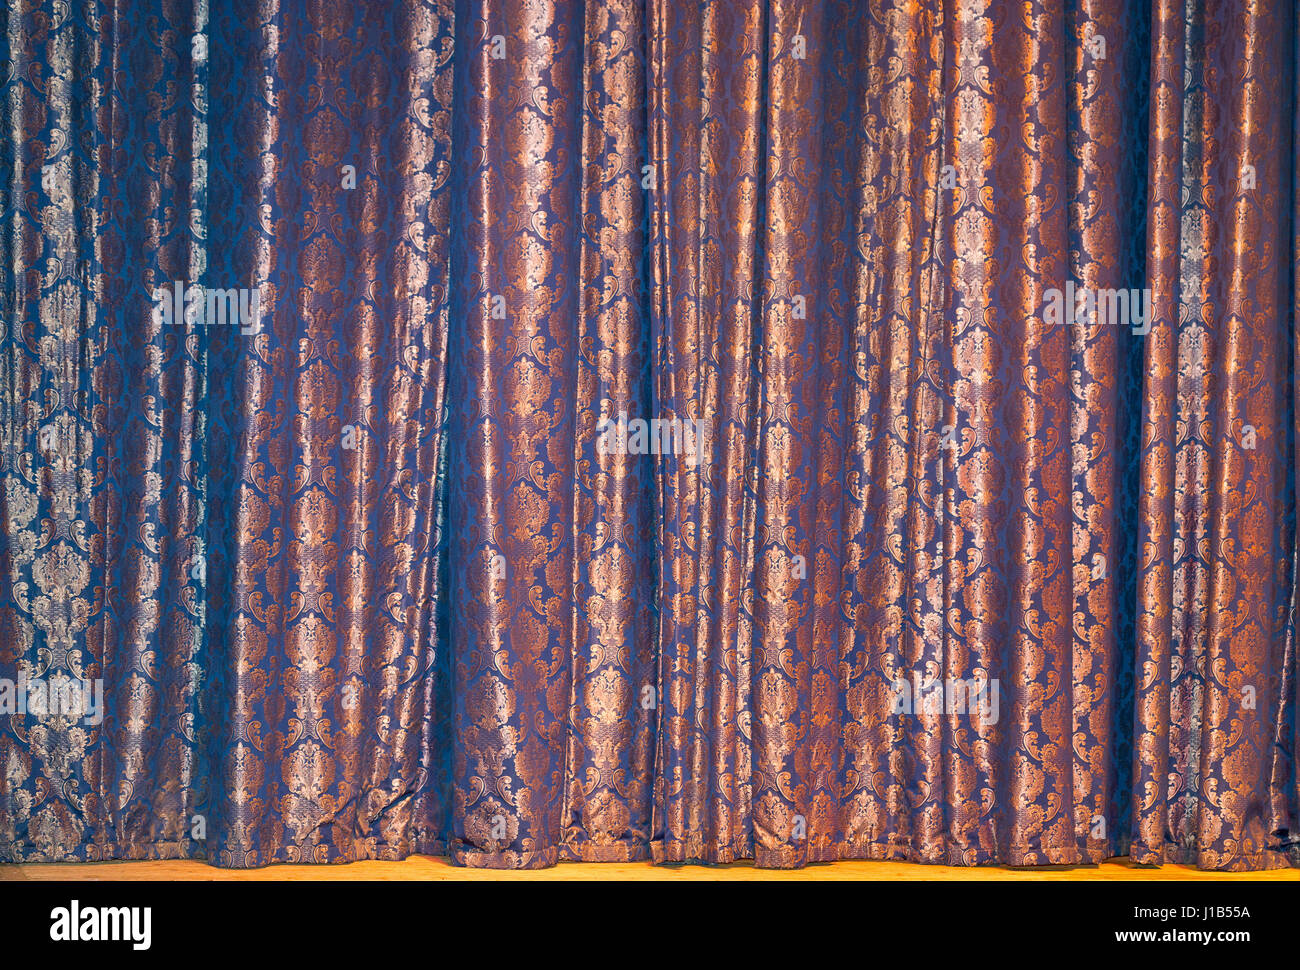 Patterned curtain of stage theater closeup Stock Photo